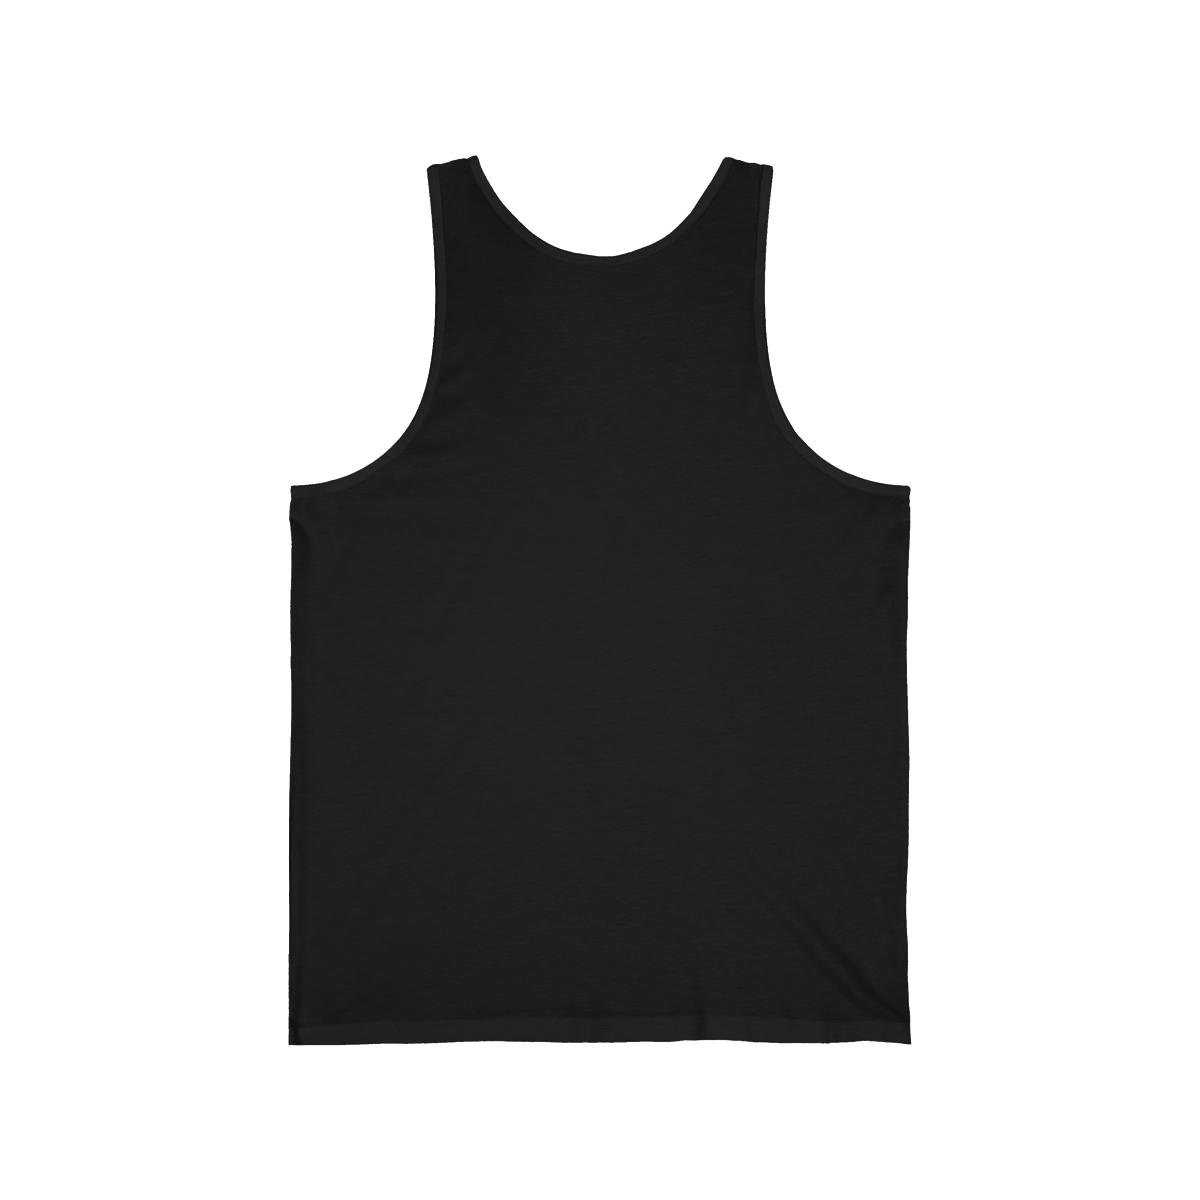 Outside the Shadows – So Much More Unisex Jersey Tank Top